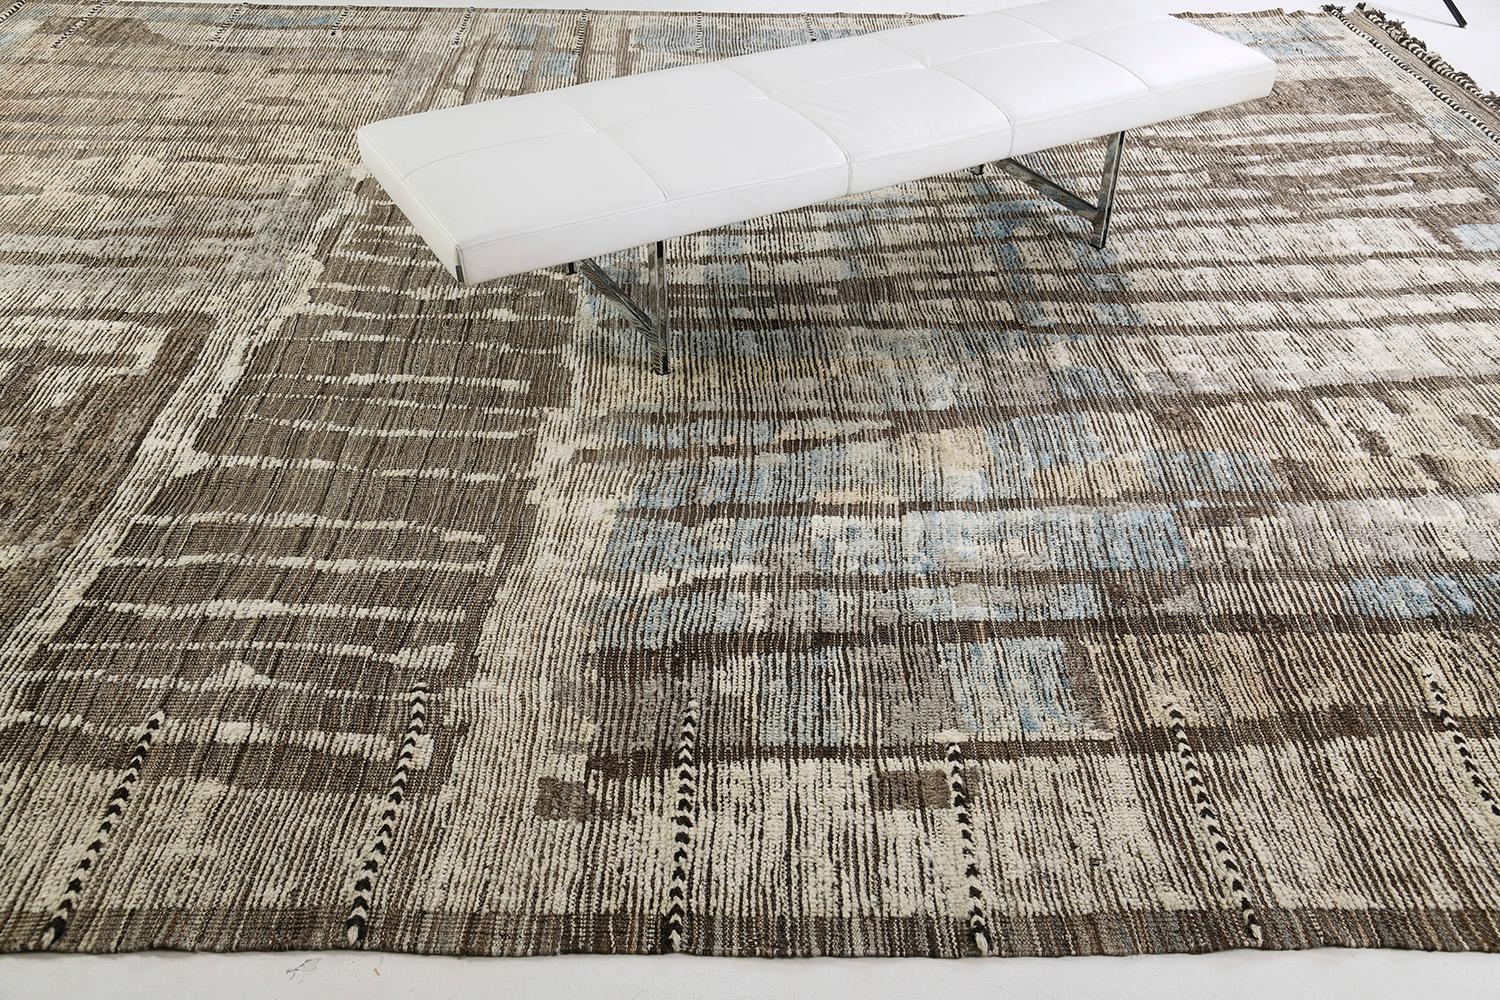 Tamarix is made of elegant wool and timeless design elements. The weaving of earthy tones and contemporary elements is what makes the Atlas Collection so unique and sought after. Mehraban's Atlas collection is noted for its saturated color,